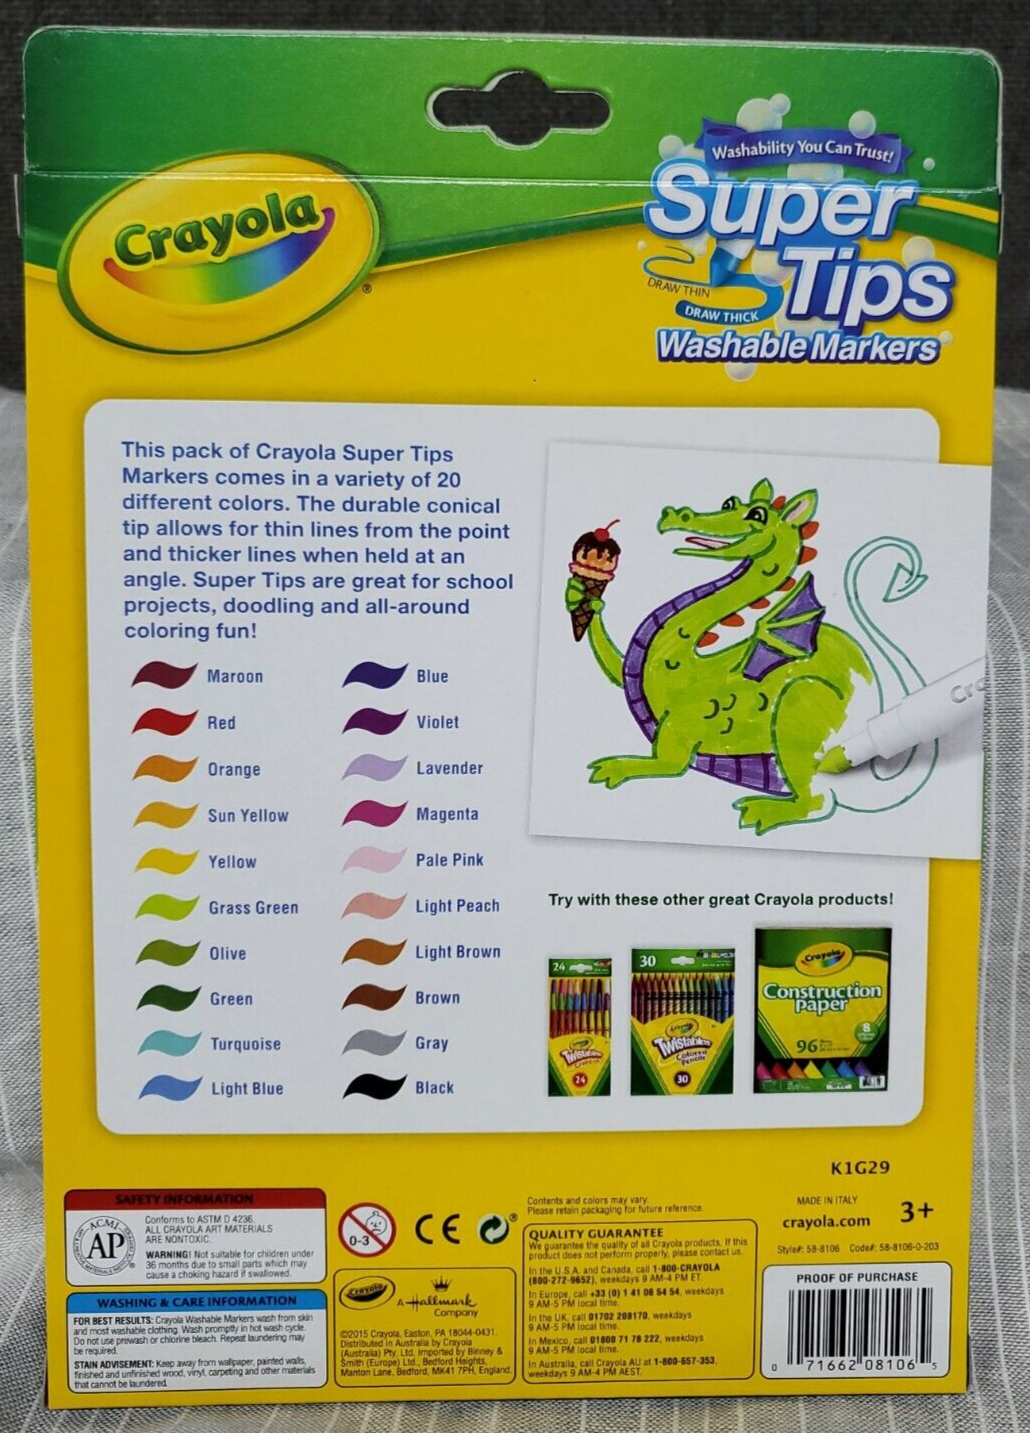 https://bndtreasurechest.com/wp-content/uploads/imported/7/57/Crayola-Super-Tips-Washable-Markers-20-Ct-Pack-Draw-Thin-Thick-NEW-256058379257-3.png